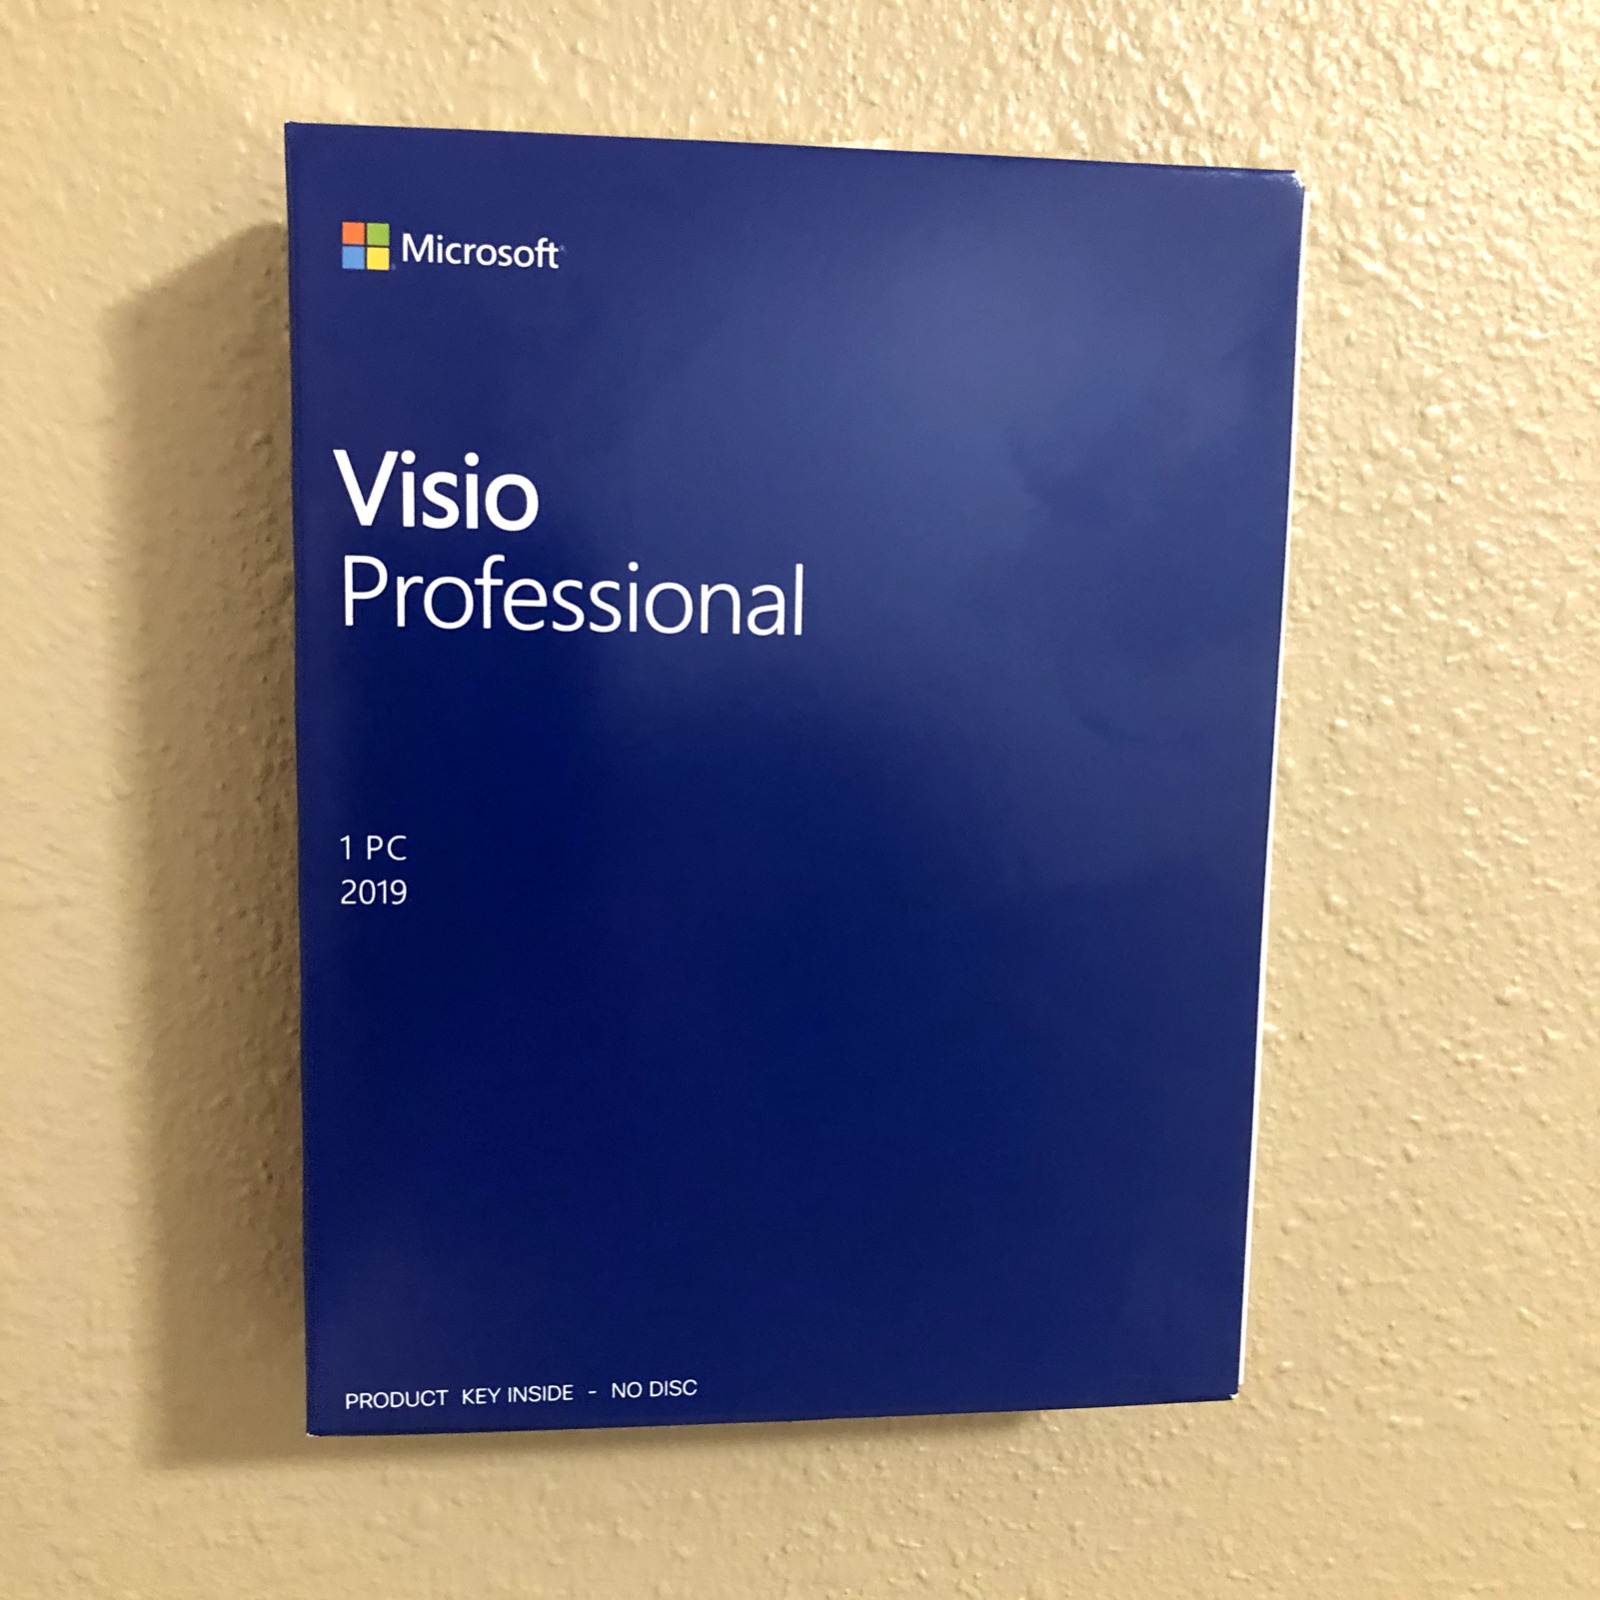 Microsoft Visio Pro 2019, one user authentic license, complete, shrink wrapped